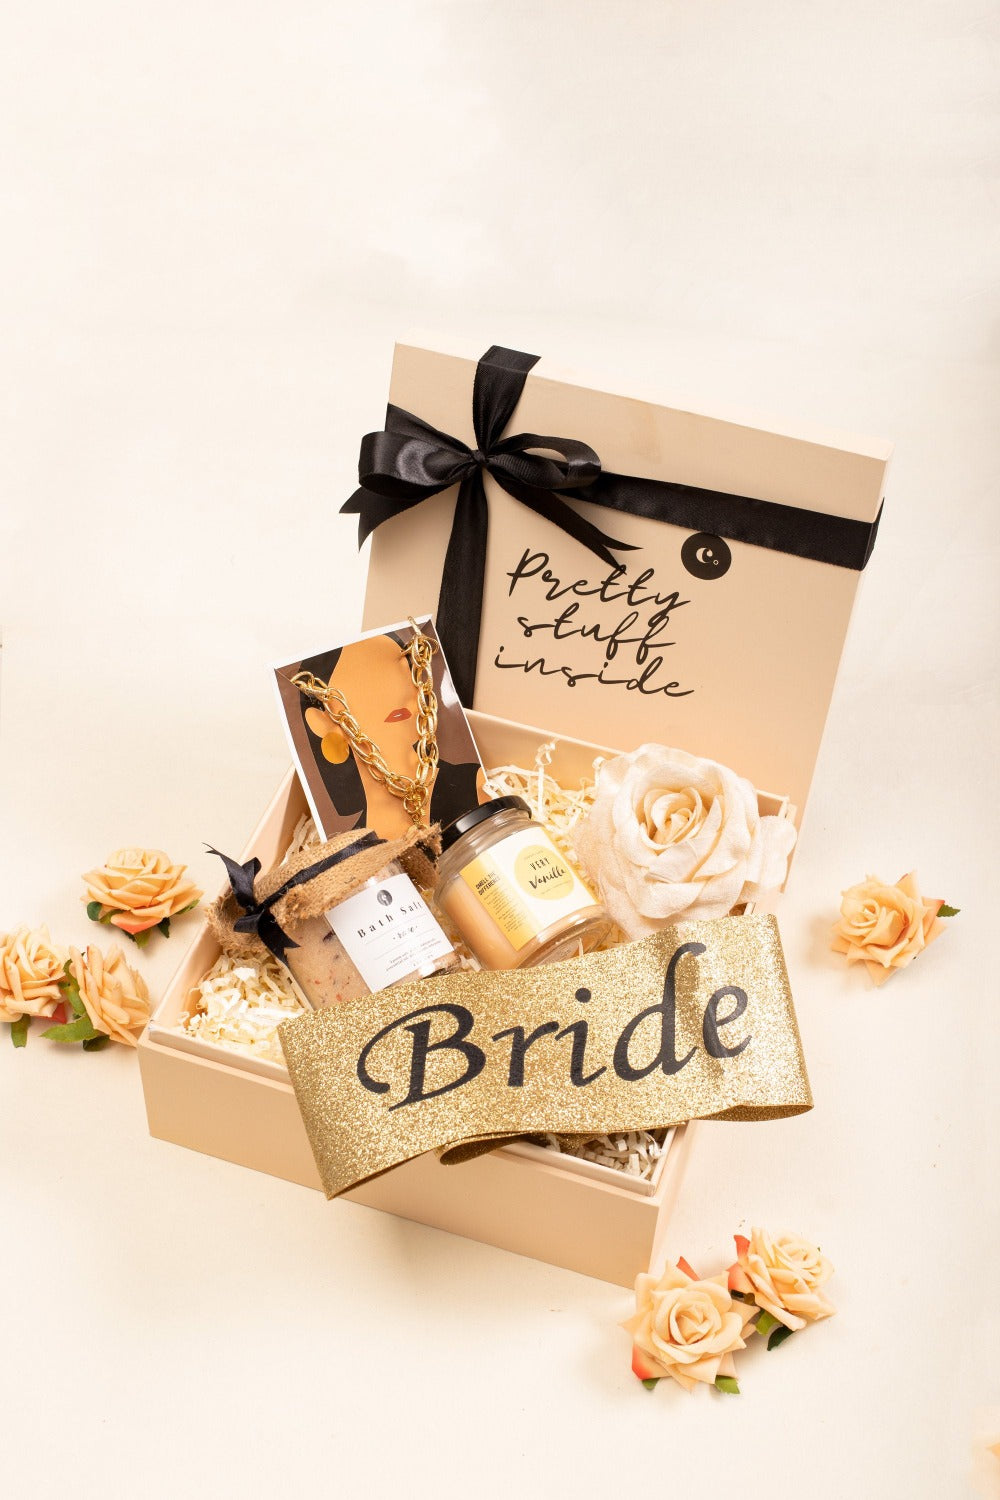 Ideas for Bride + Groom Wedding Day Gifts + Note Exchanges - Revival  Photography | Husband + Wife Photographers Based in North Carolina  Specializing in Weddings, Commercial, and Editorial Photography